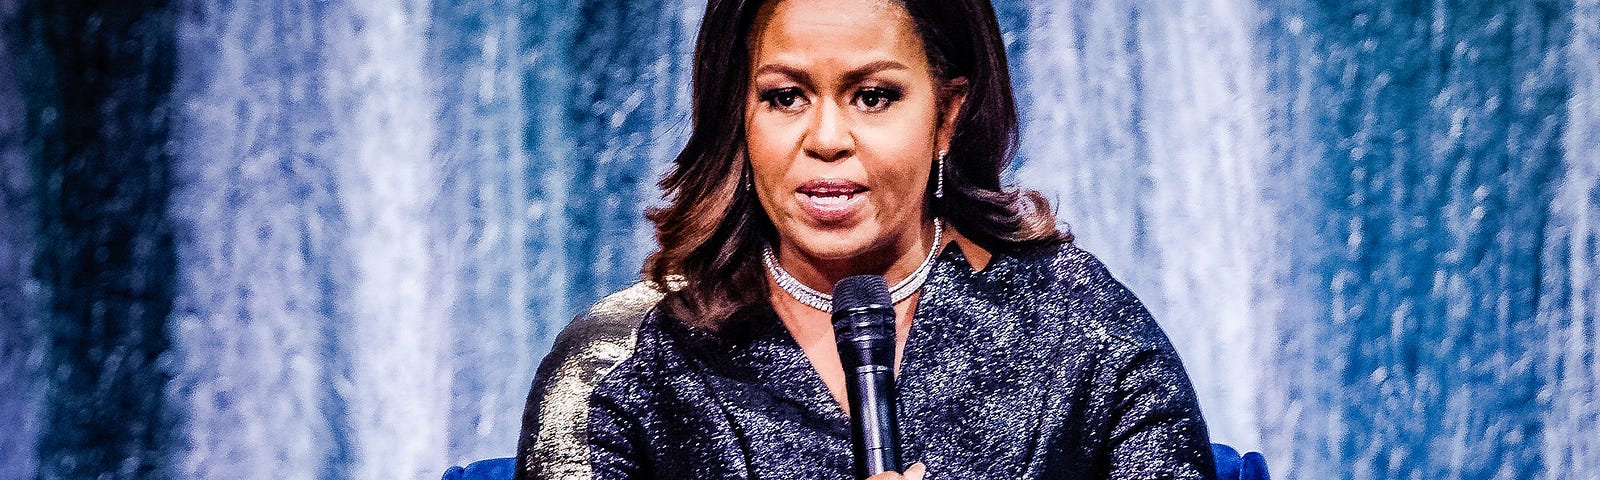 Michele Obama is always authentic. Find out why.